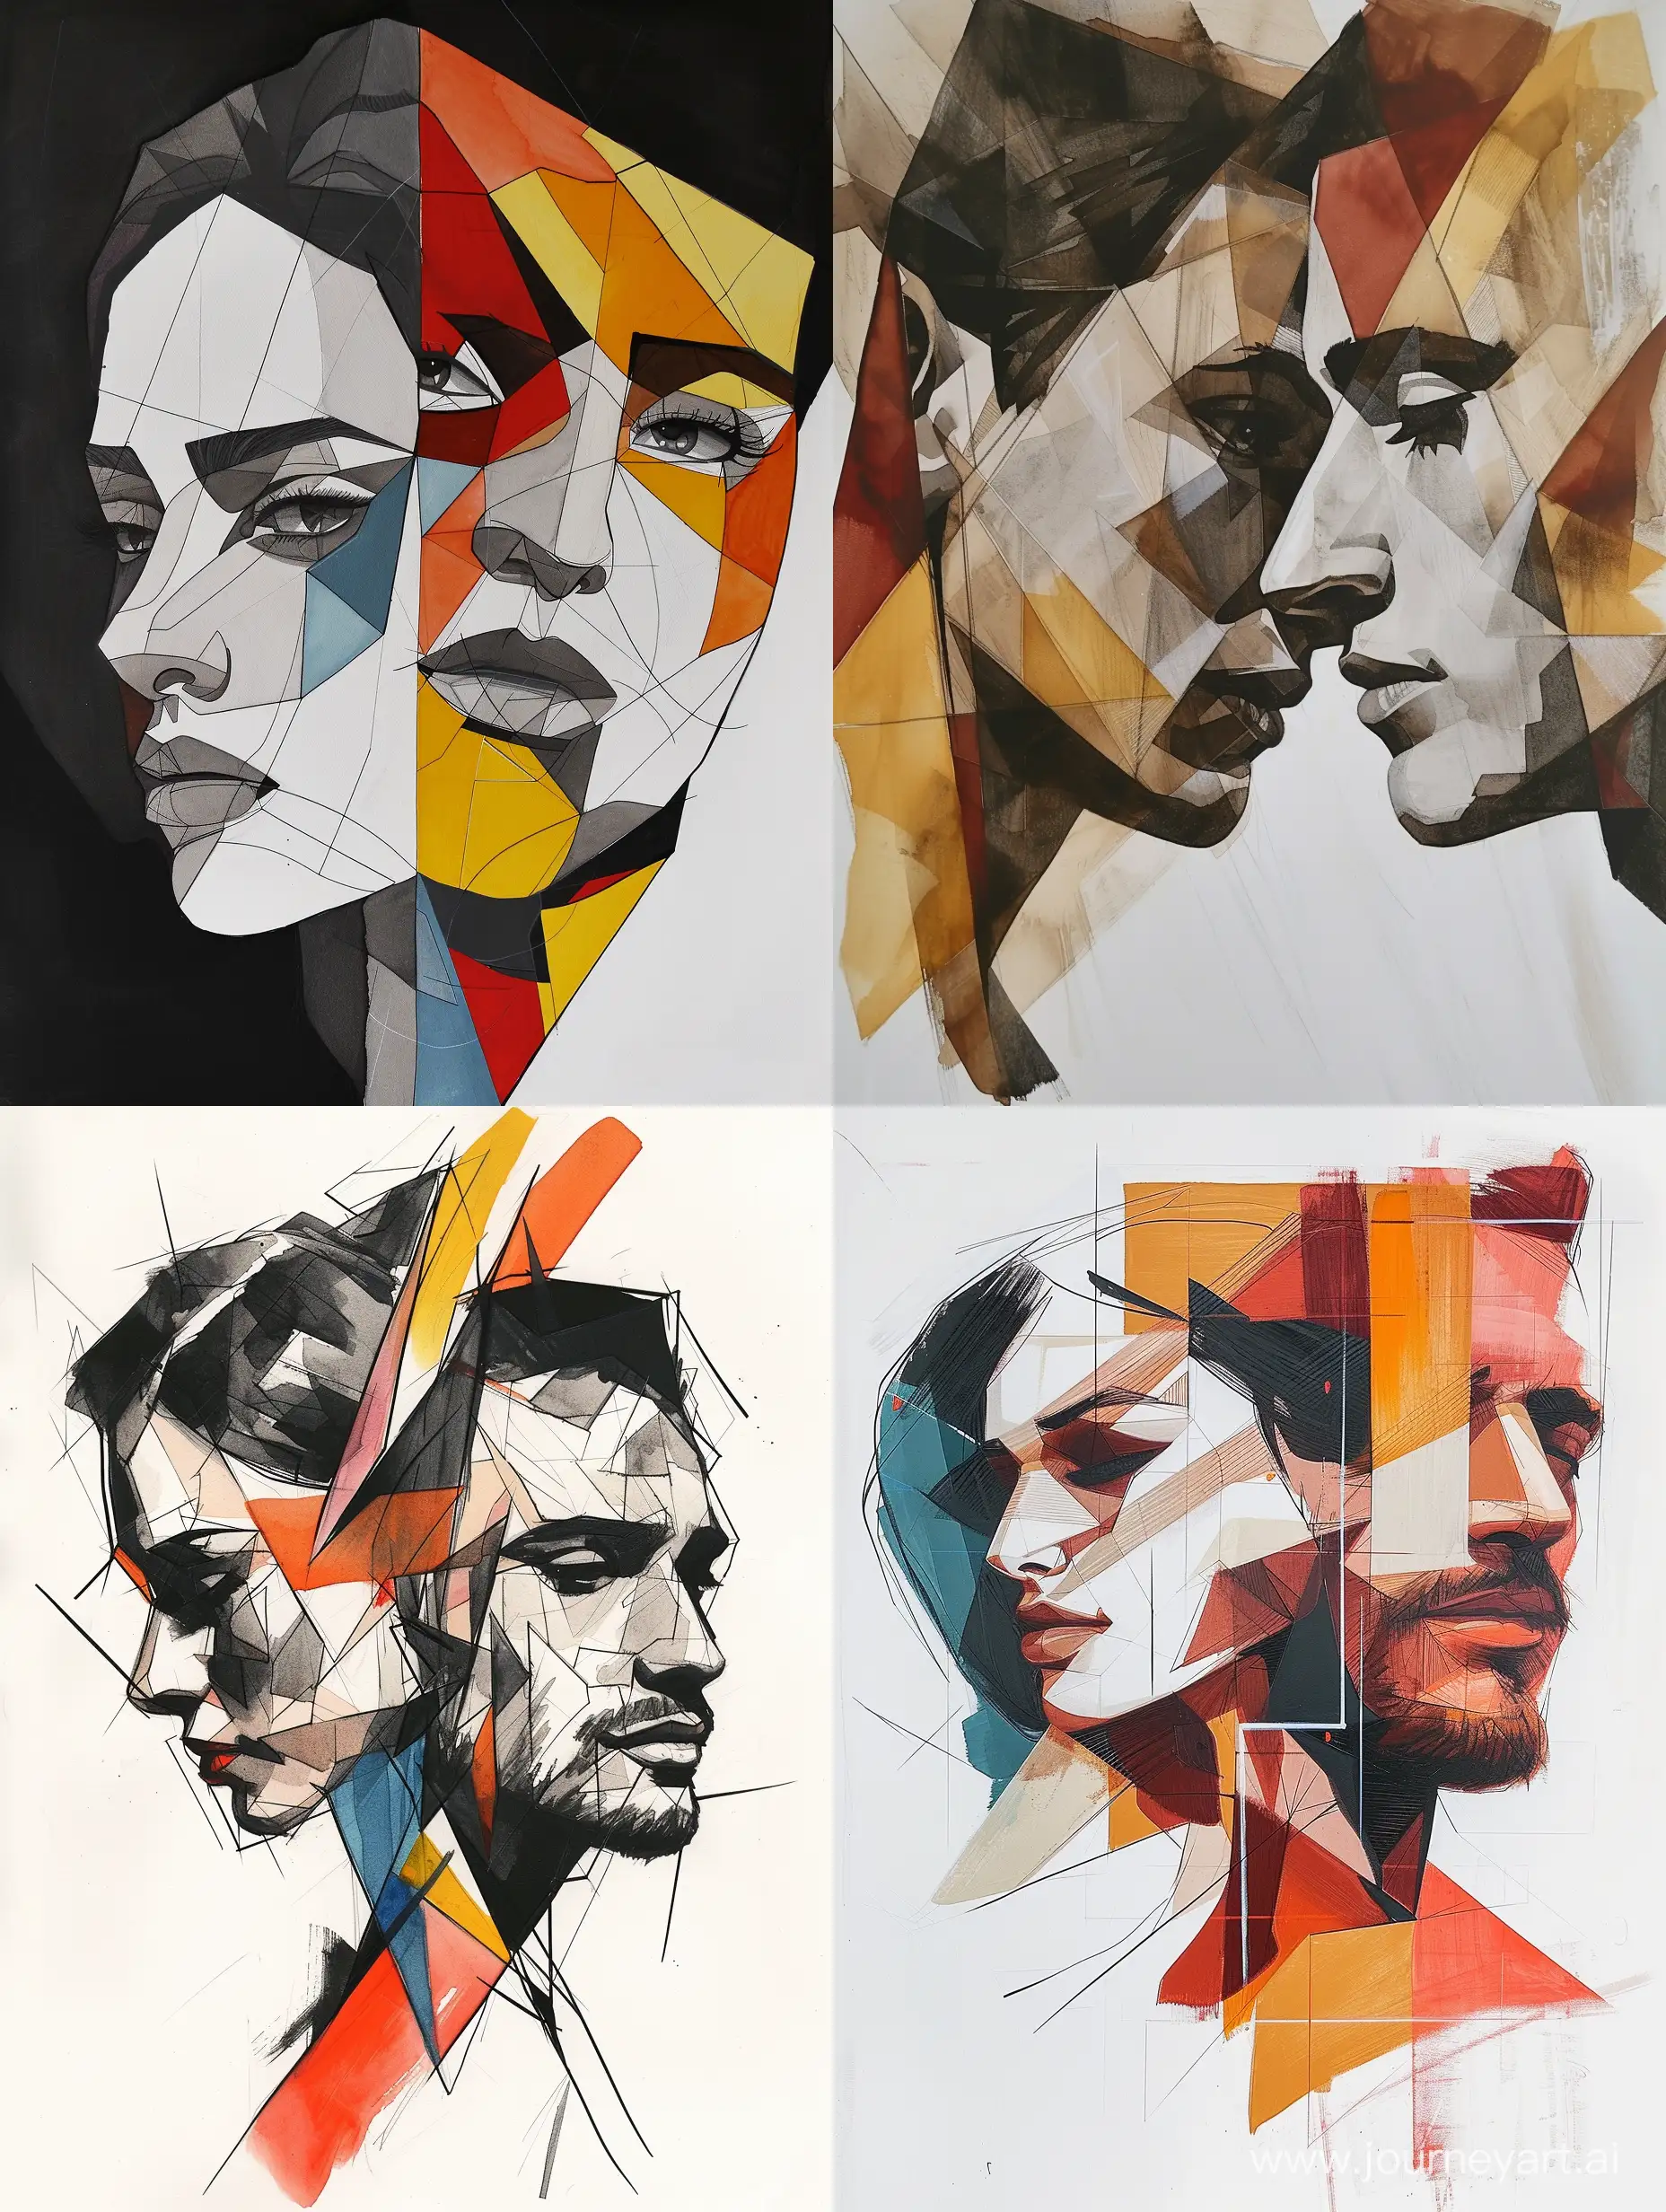 Abstract-Geometric-Sketches-of-Man-and-Woman-in-Acrylic-Tones